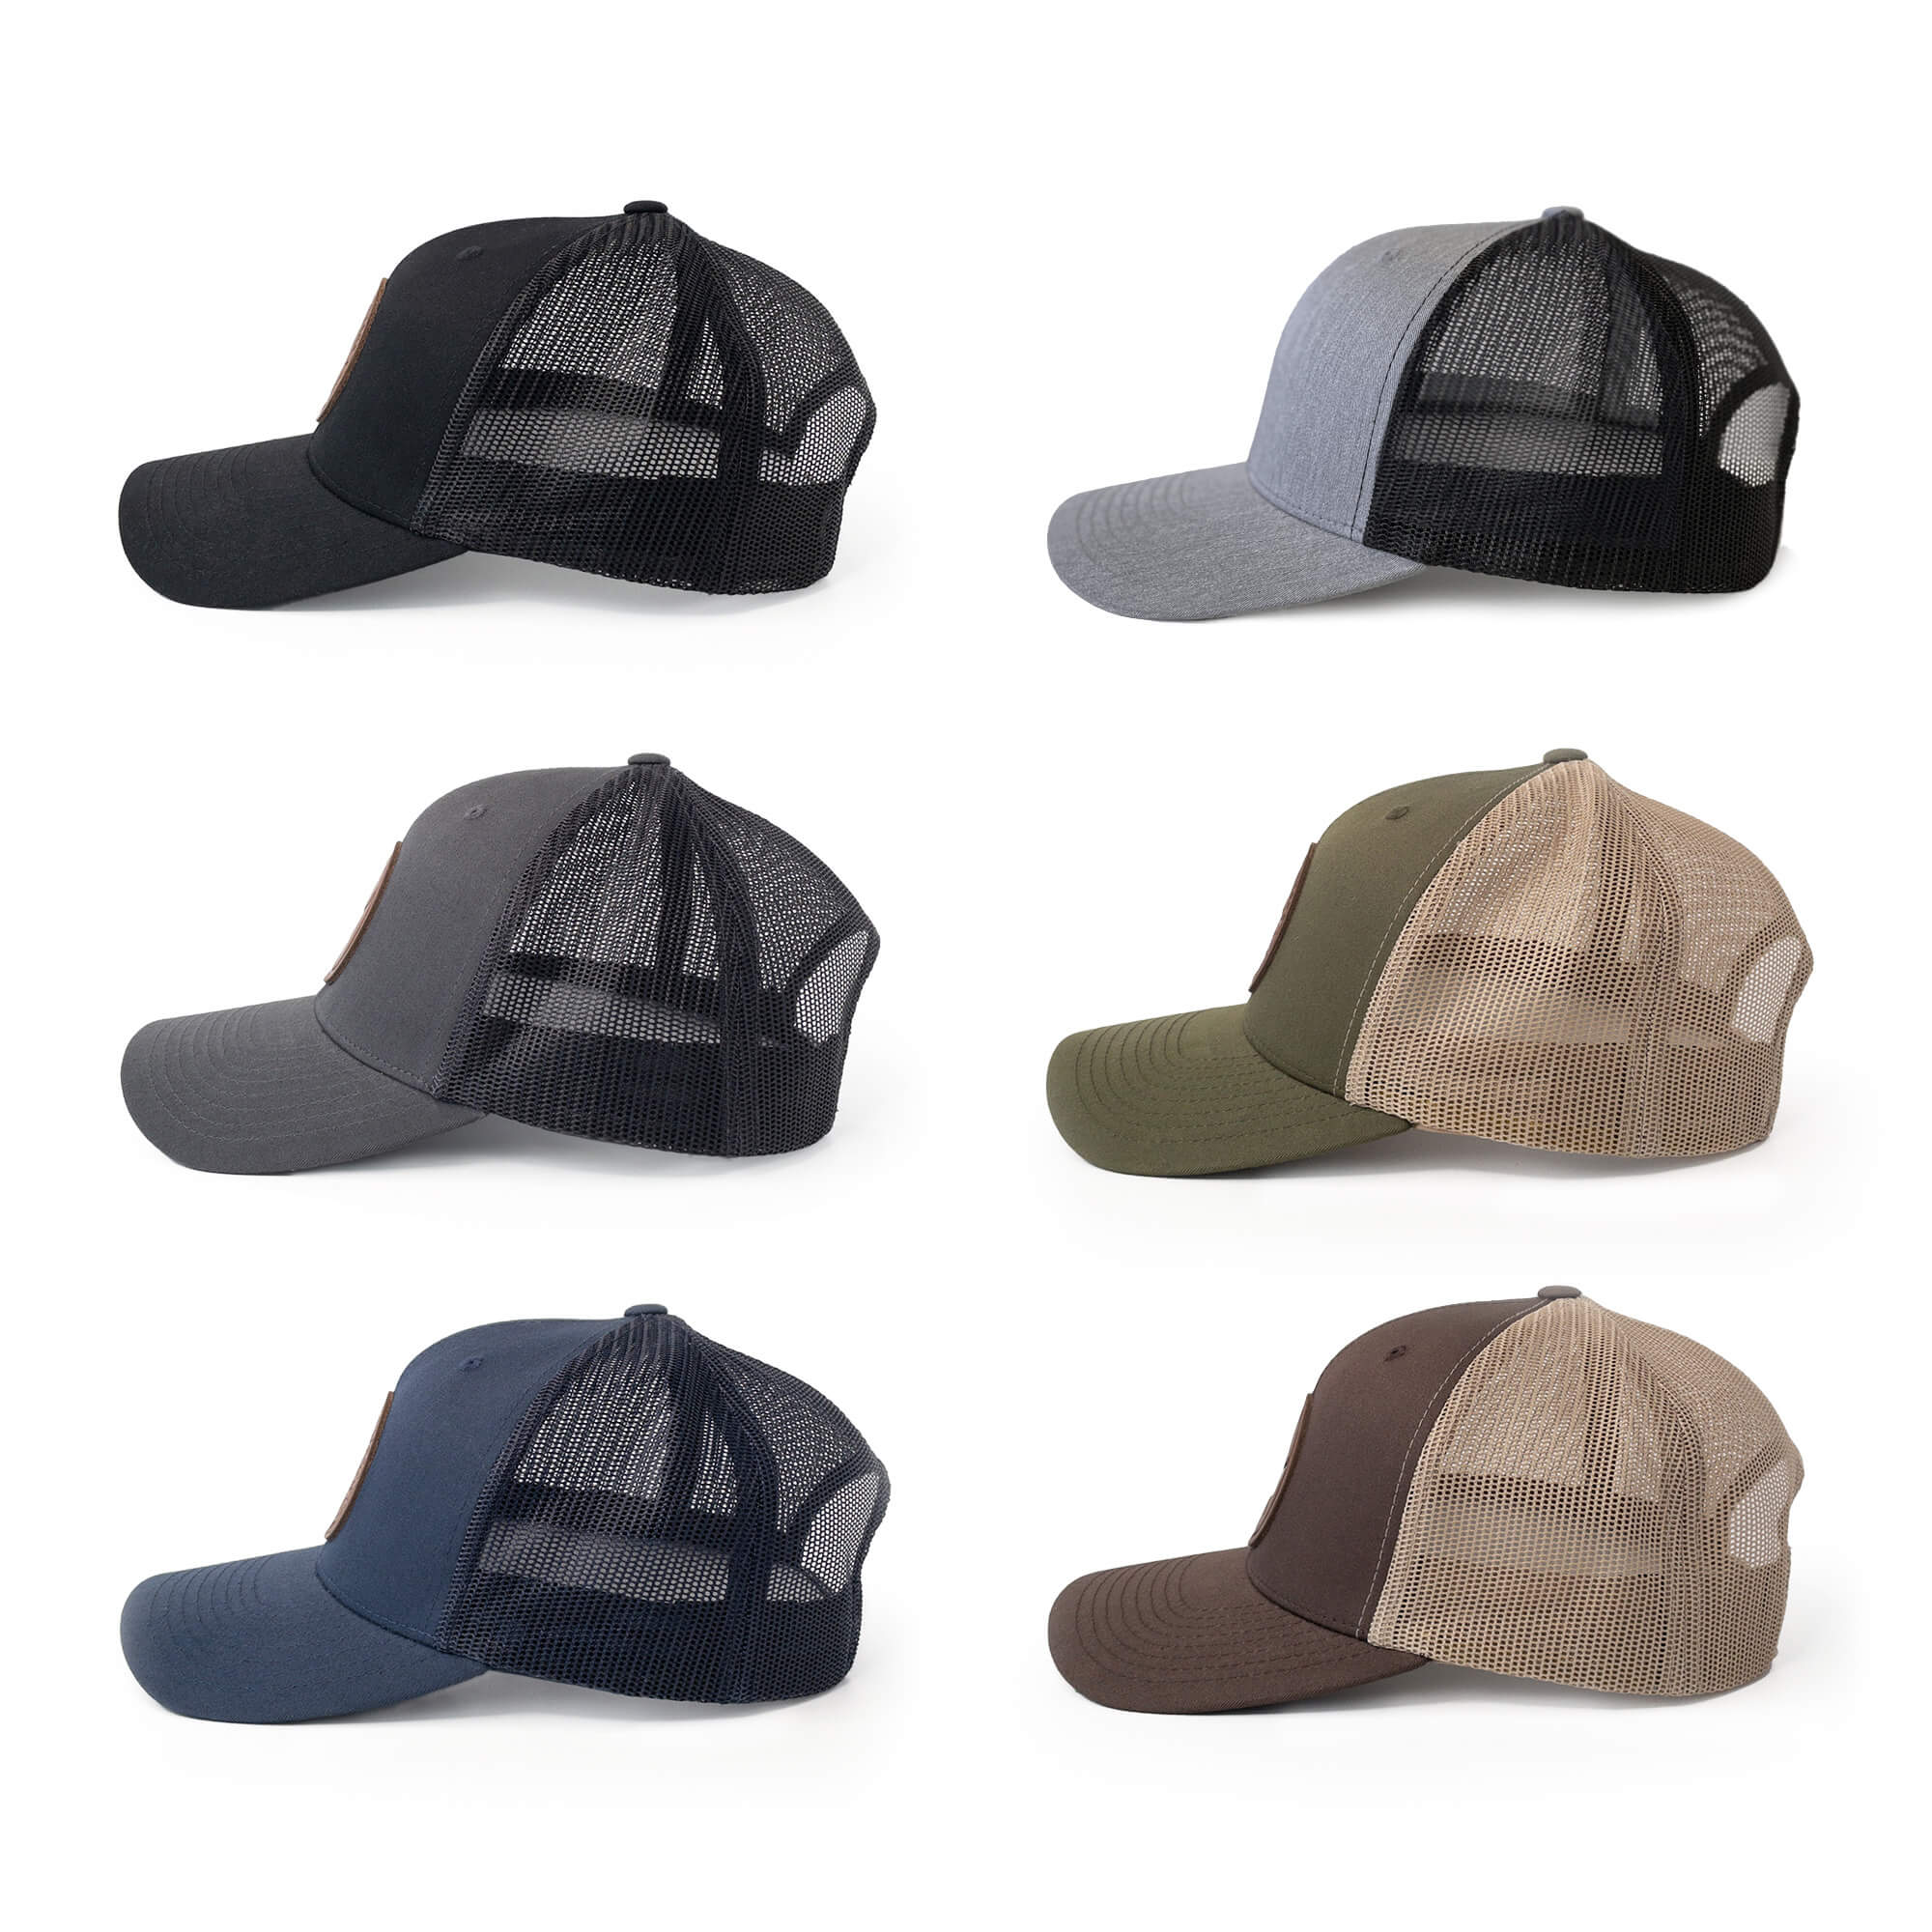 Leather patch trucker hats available in 6 colors | BLACK-005-001, CHARC-005-001, NAVY-005-001, HGREY-005-001, MOSS-005-001, BROWN-005-001